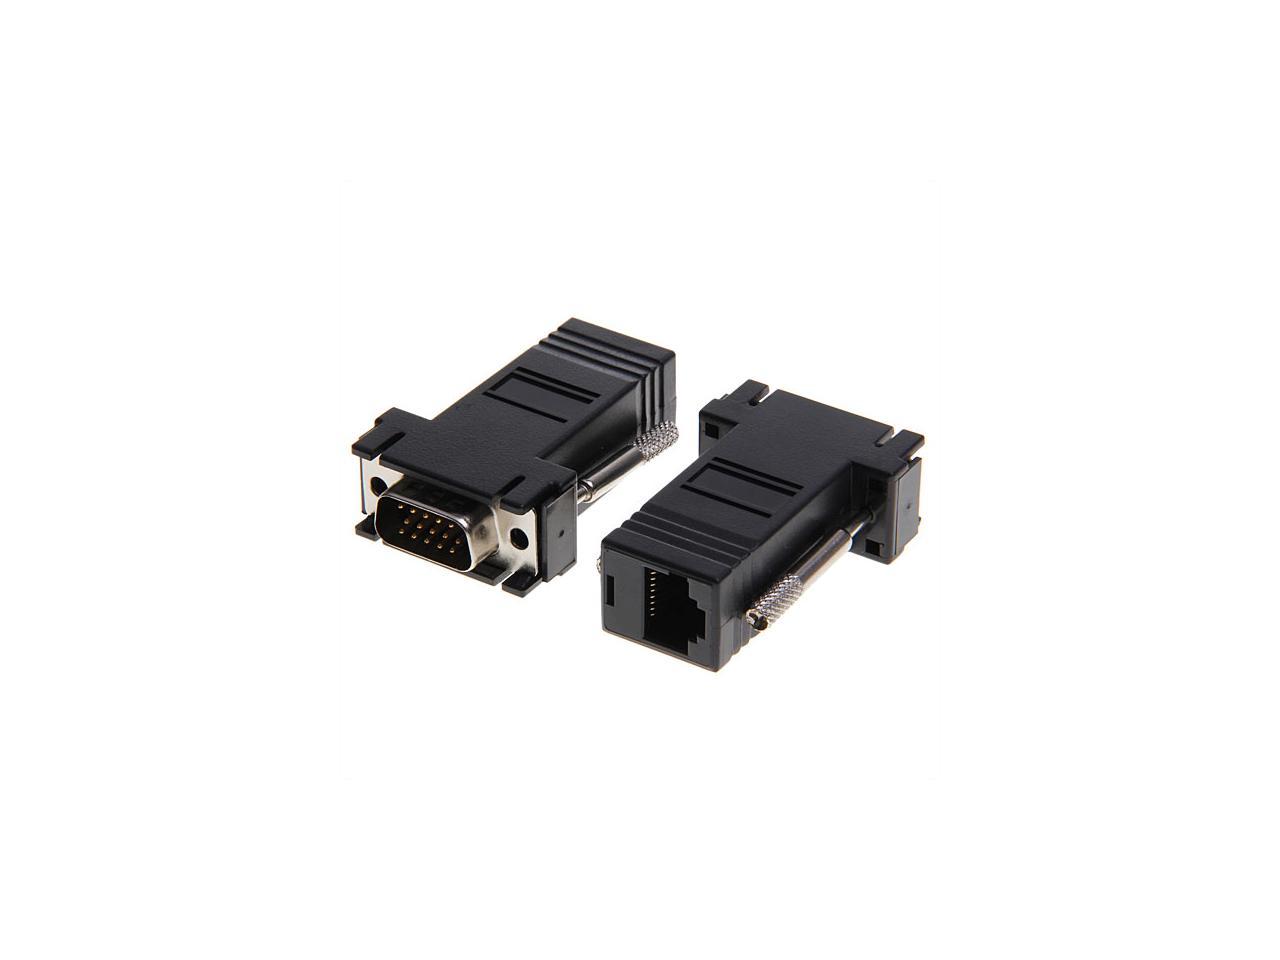 Cable Length: Other Occus 2018 VGA Extender Male to LAN CAT5 CAT6 RJ45 Female Network Cable Adapter Kit 